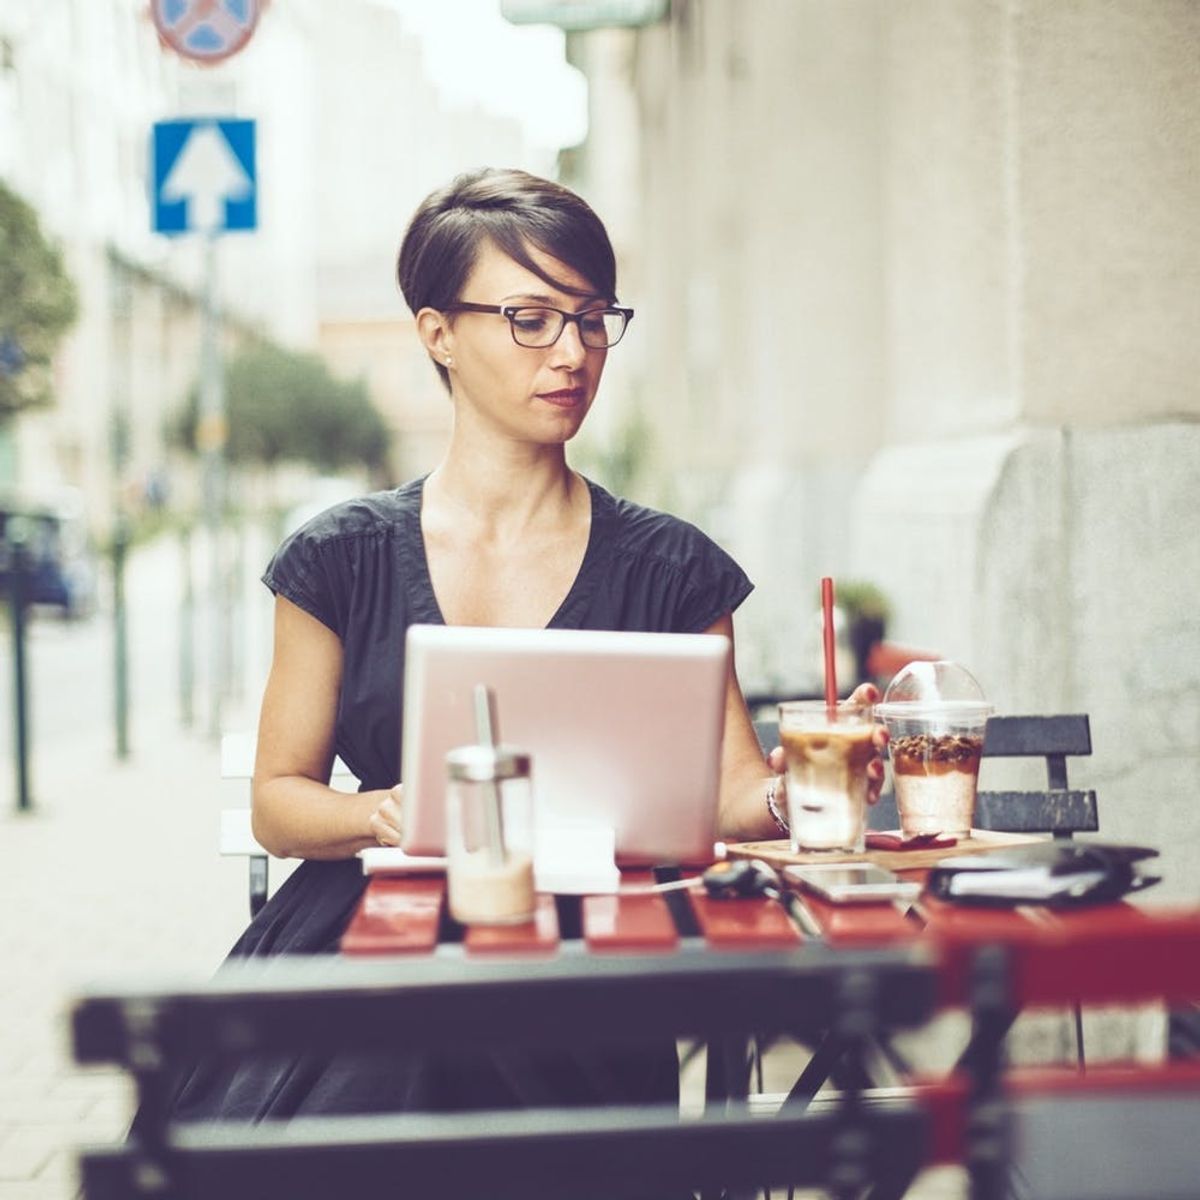 This Study Ranks the Best Cities for #Girlbosses to Start a Business